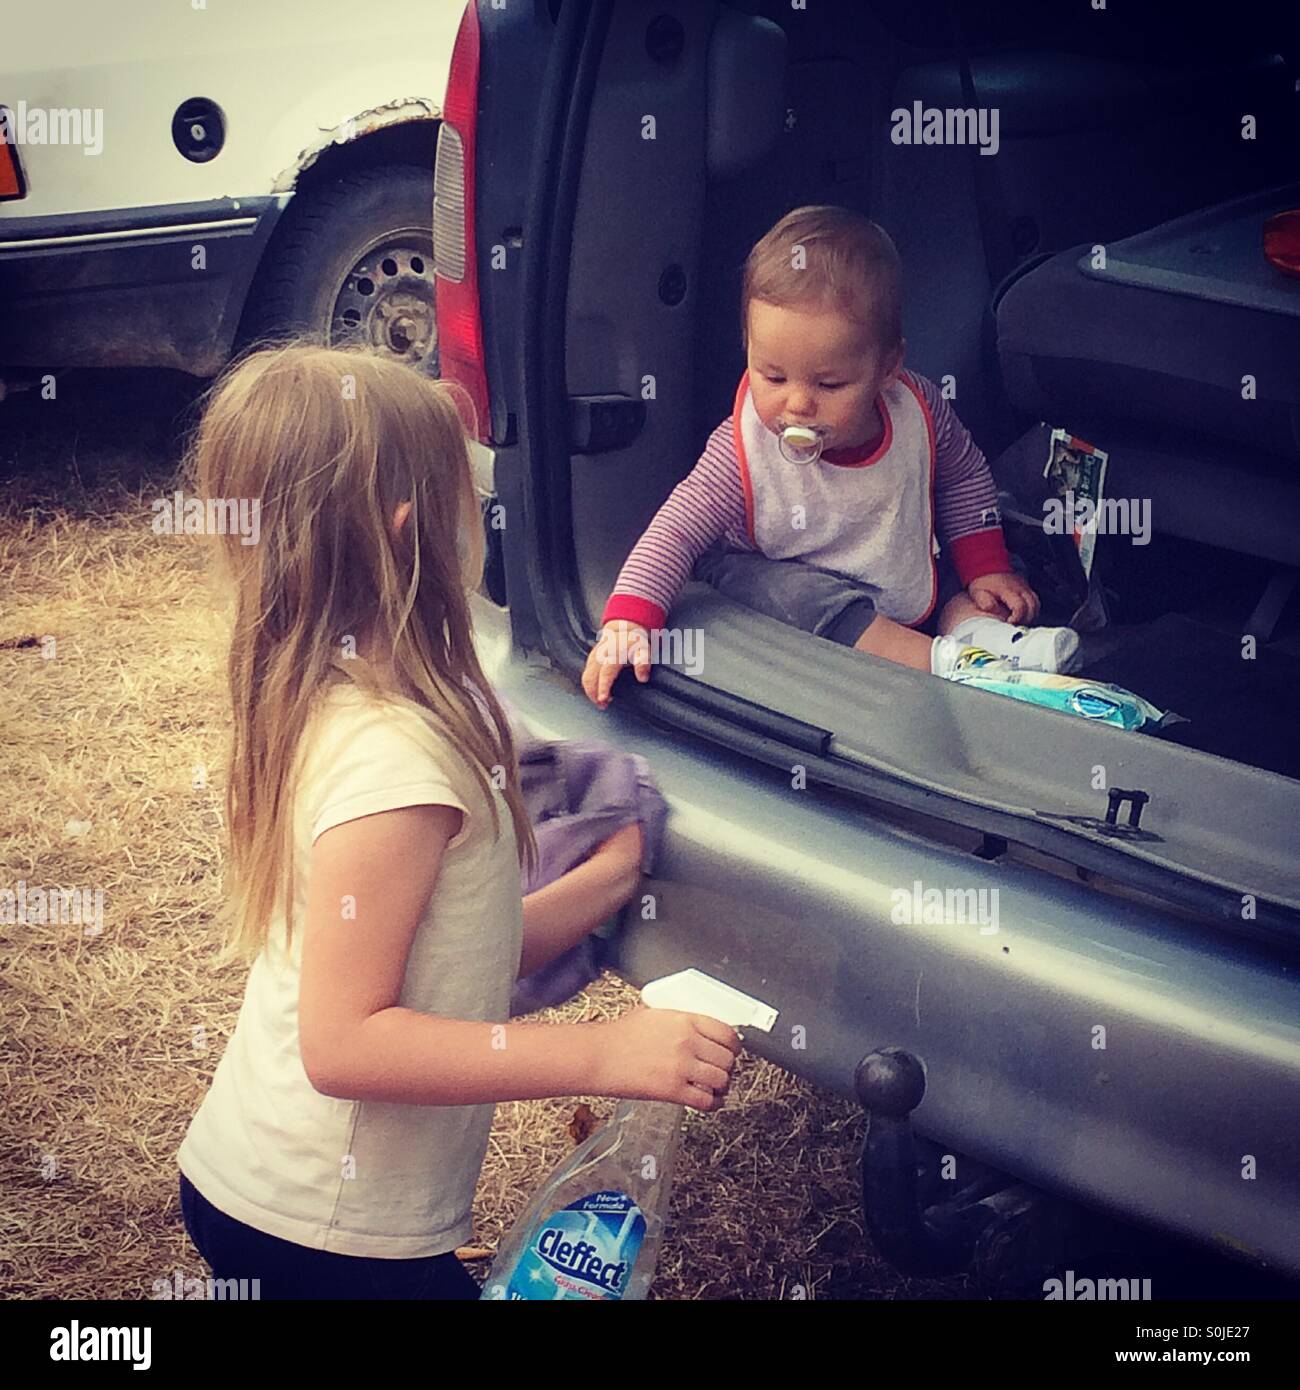 Baby Boy Sitting In The Trunk Of A Van Is Pointing At A Cloth Held By His Sister Who Is Washing The Car Stock Photo Alamy